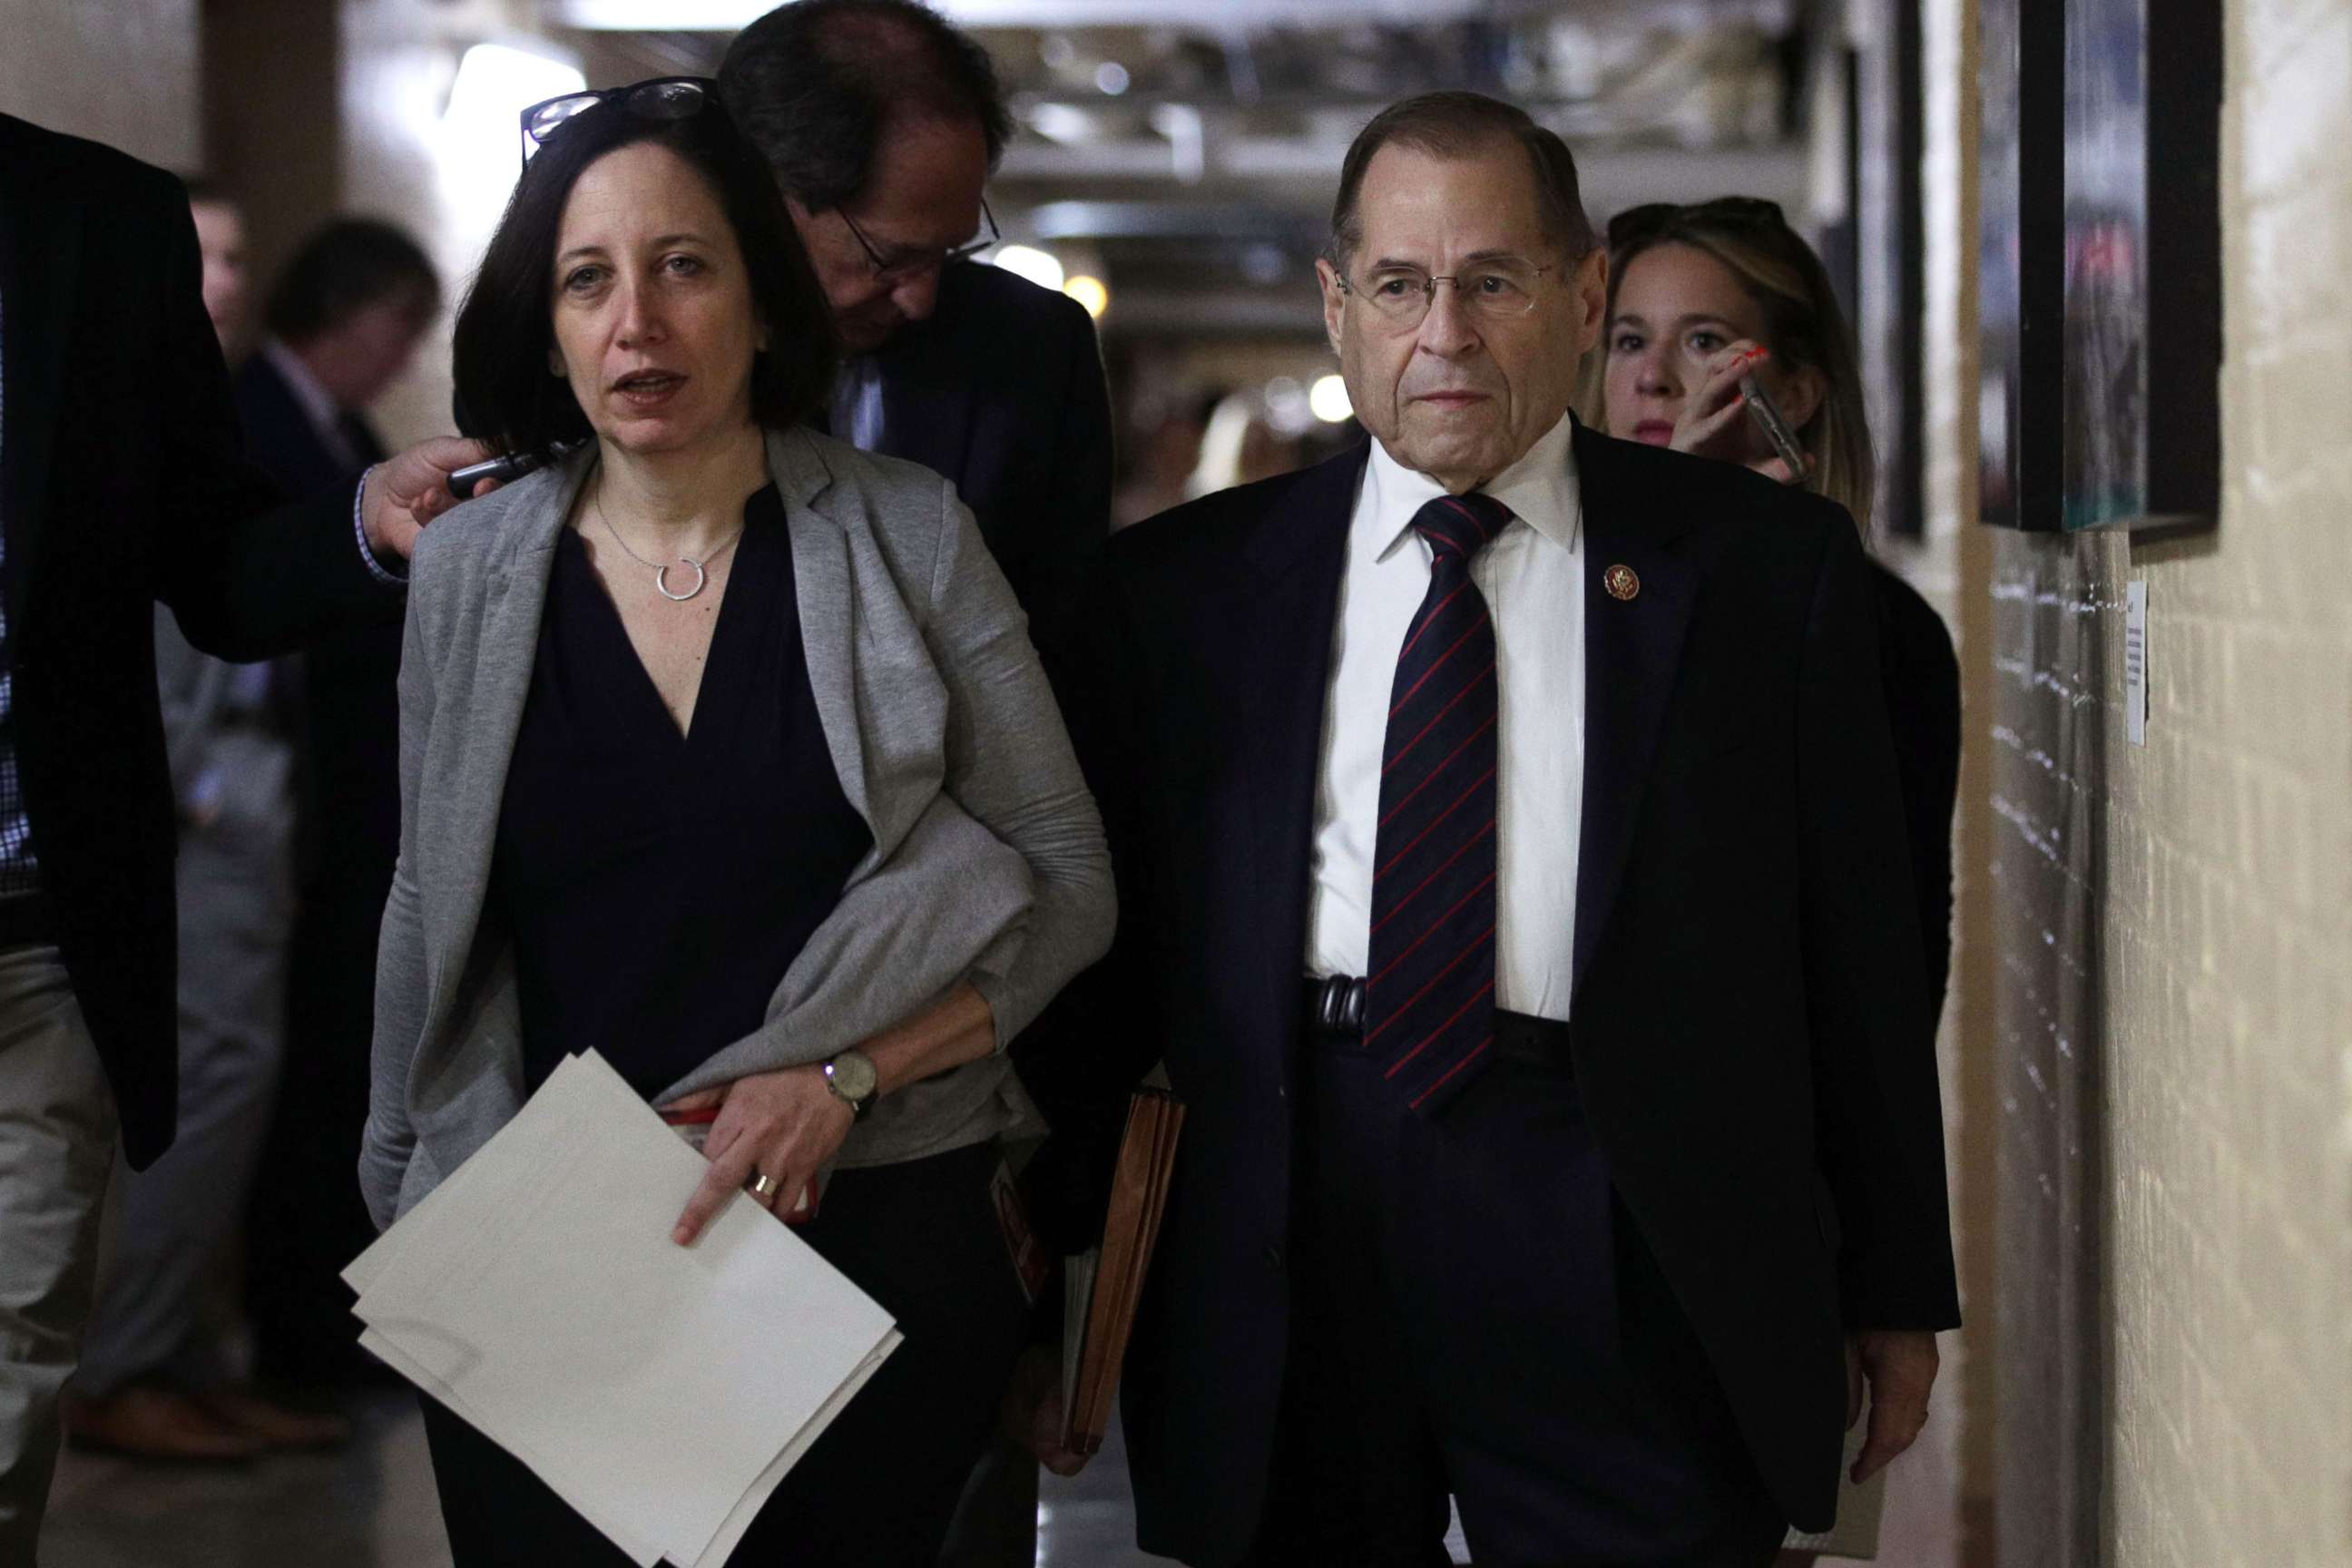 PHOTO: Committee Chairman of U.S. House Judiciary Committee Rep. Jerry Nadler leaves a House Democrats meeting at the Capitol May 22, 2019, in Washington.